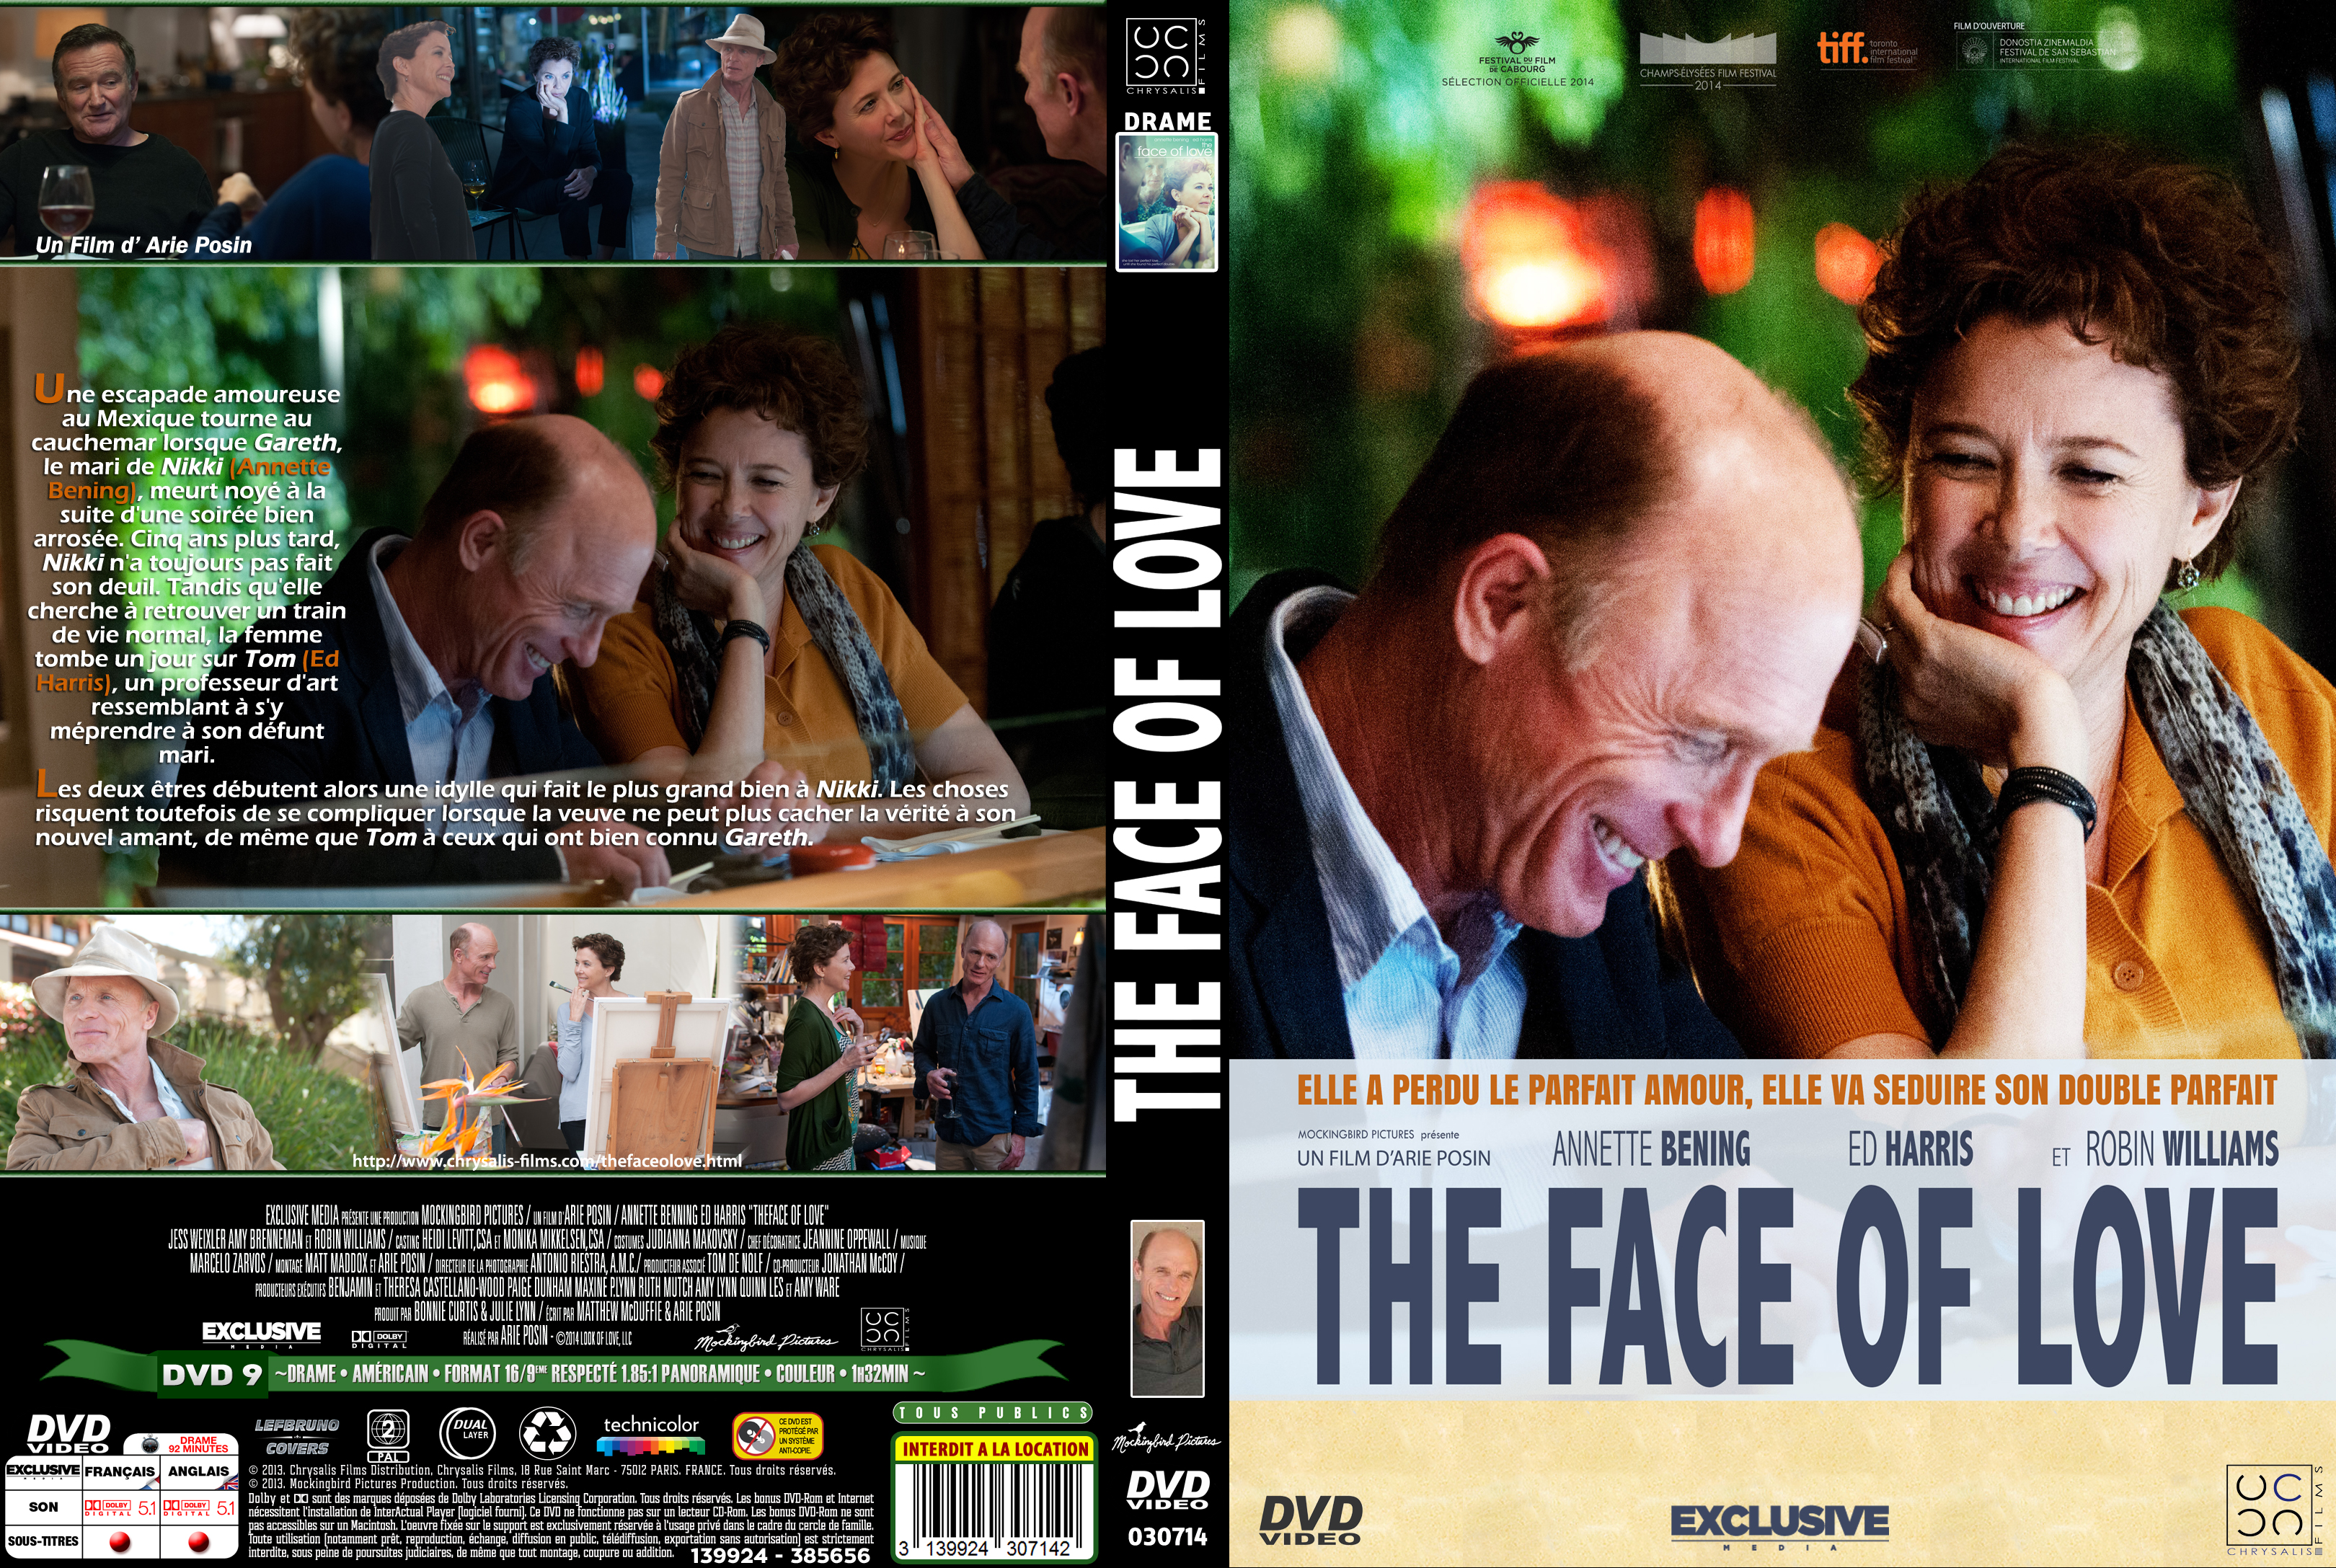 Jaquette DVD The Face of Love custom